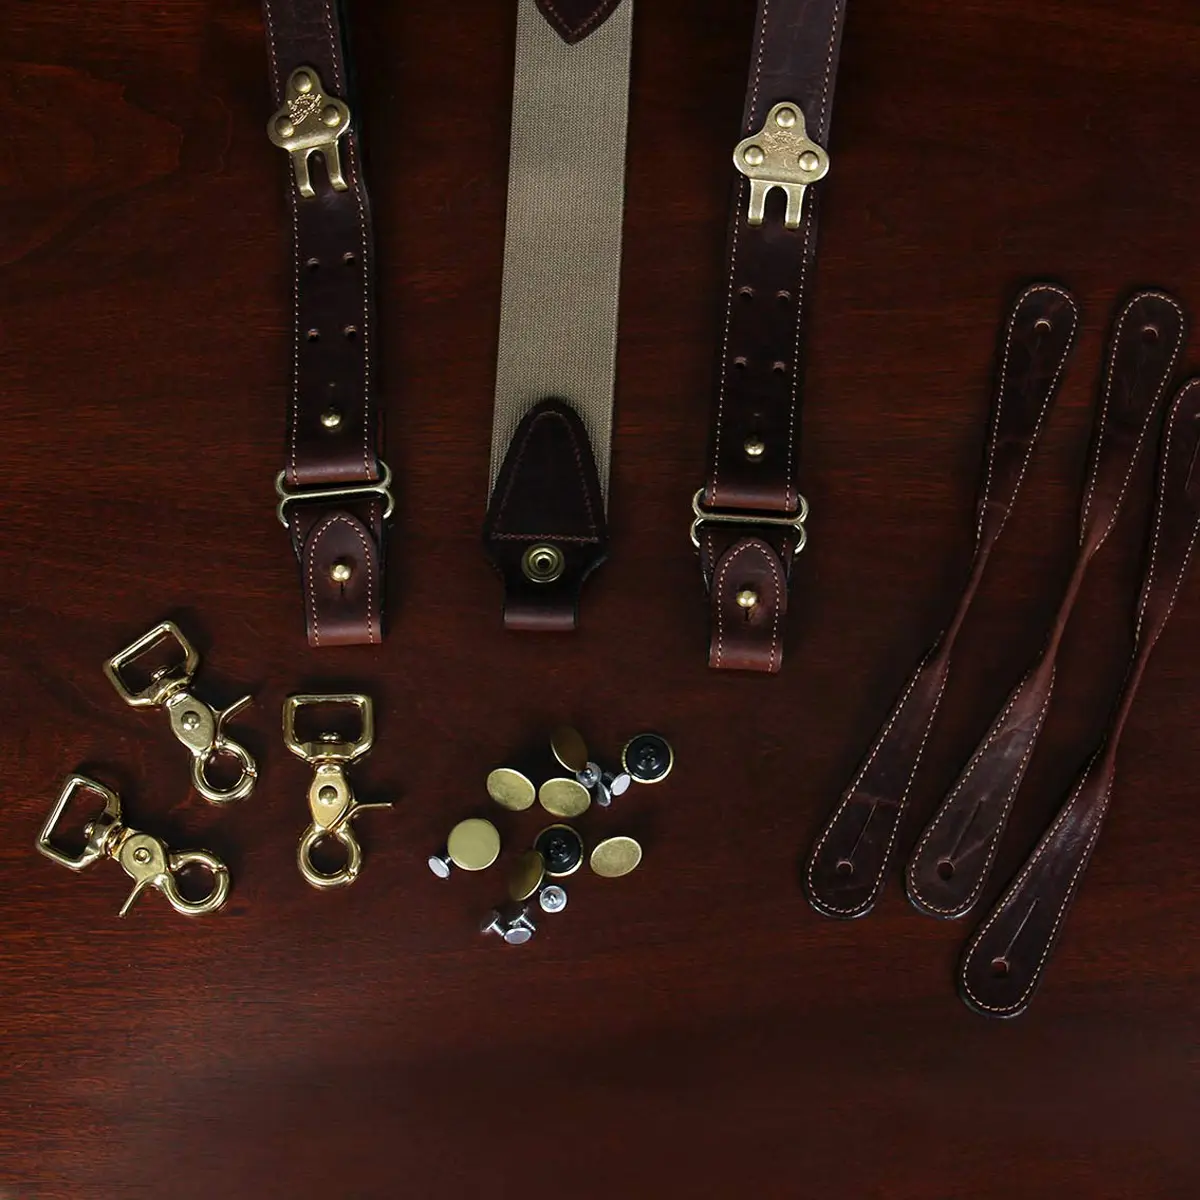 Charleston Belt & Suspenders - Outfitting the Palmetto Life